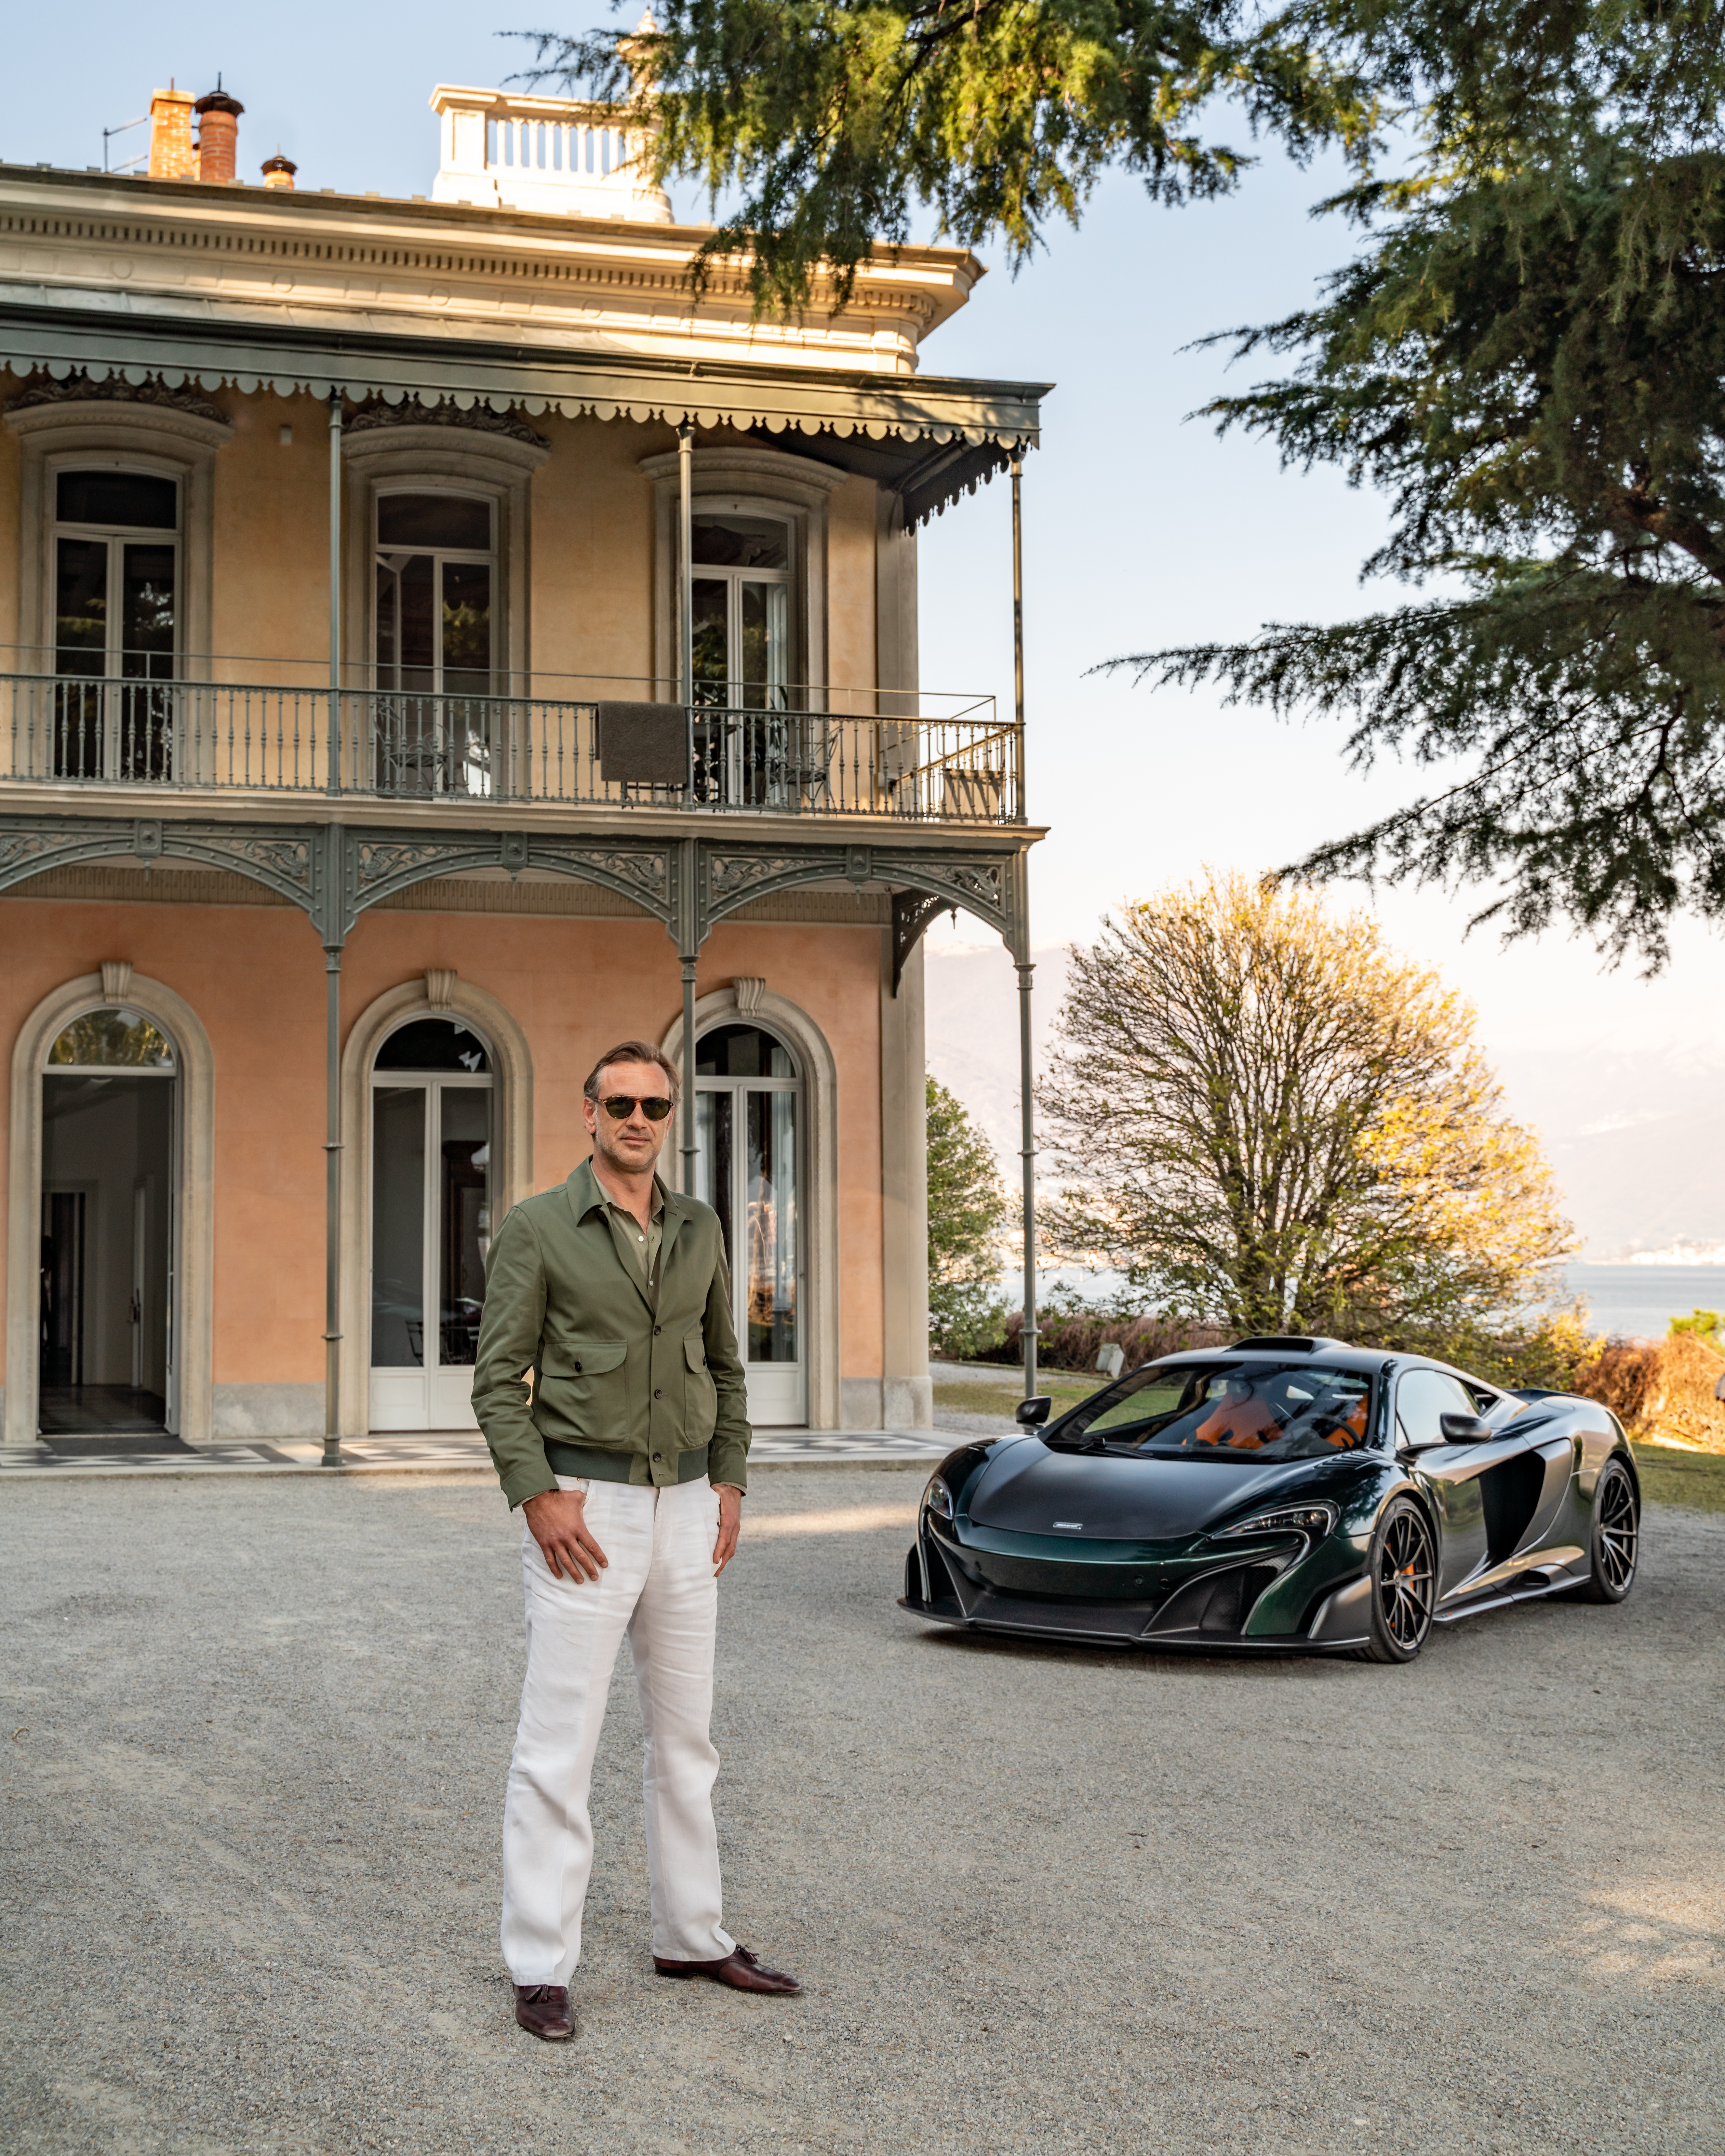 Gugliemo Miani with the McLaren 675 LT MSO 2 Semanal Clásico 